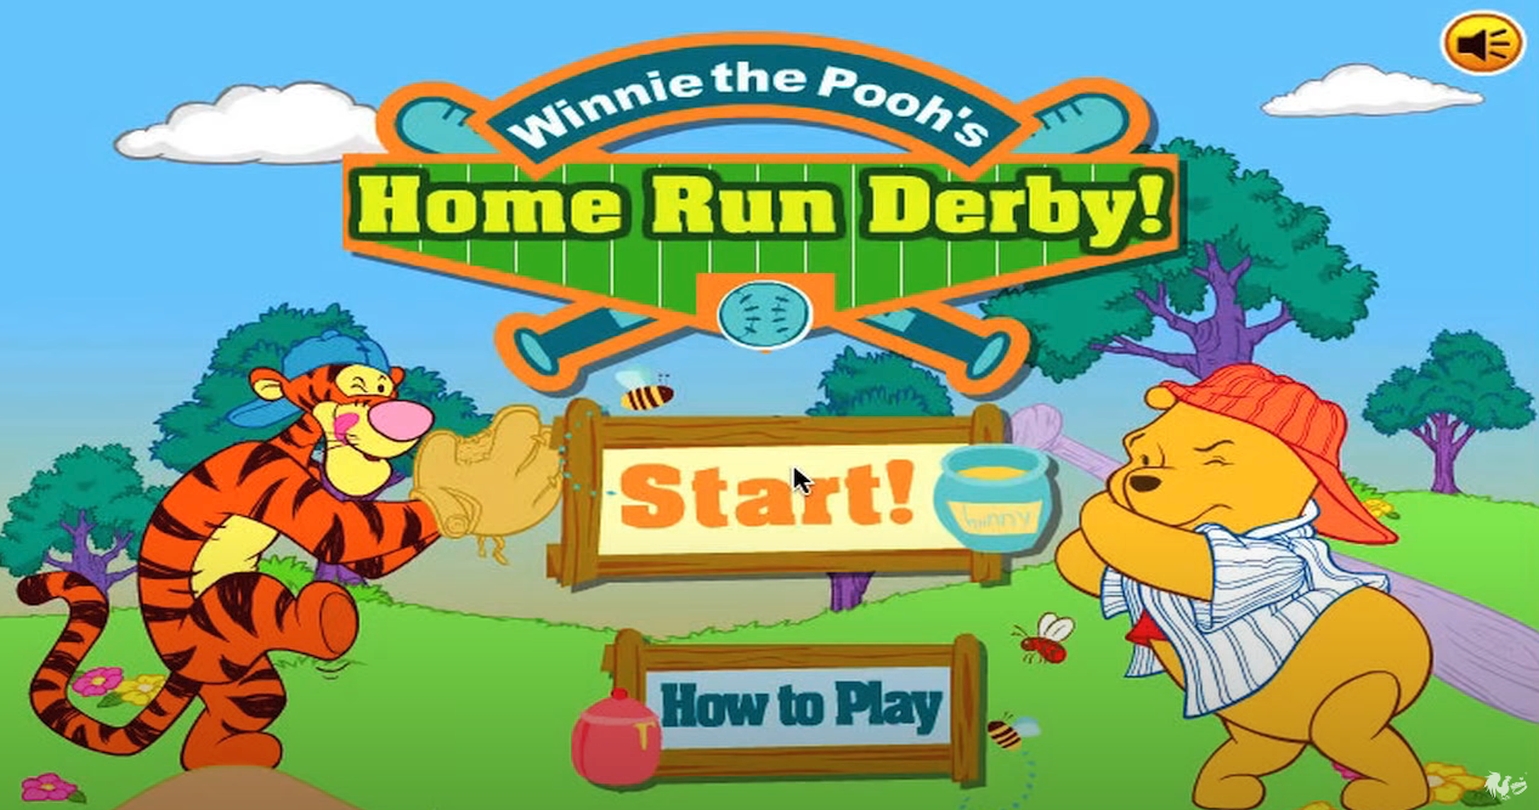 Winnie the Pooh’s Home Run Derby Service Ends As Other Flash Games Prepare To Shut Down